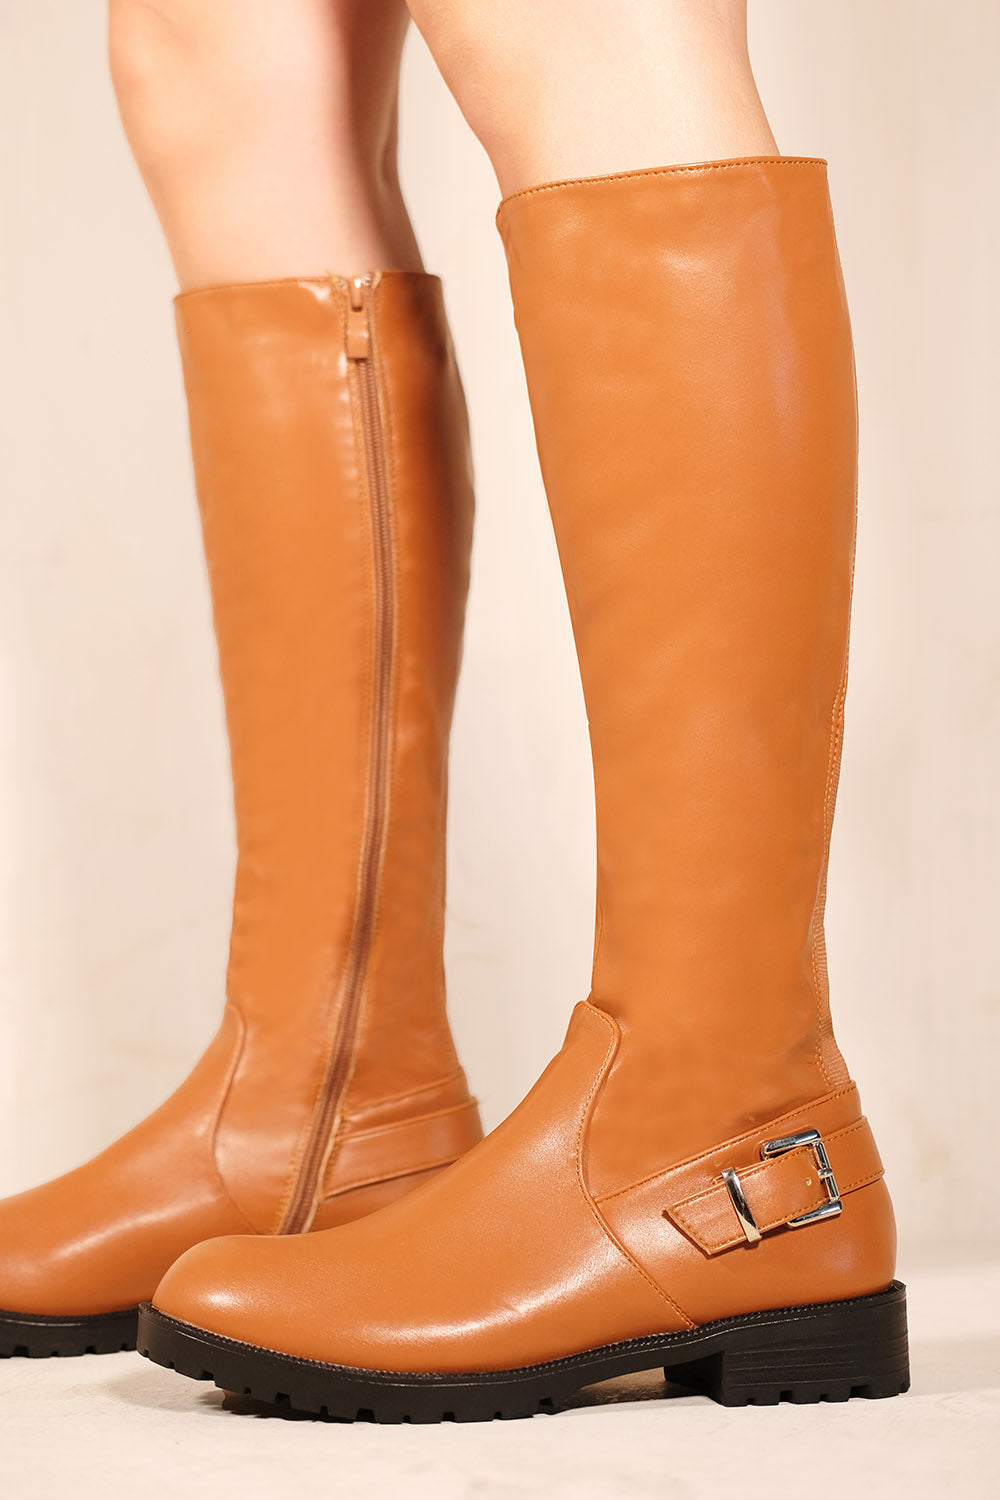 ROOBIE CALF HIGH STRETCH BOOTS WITH BUCKLE IN TAN FAUX LEATHER